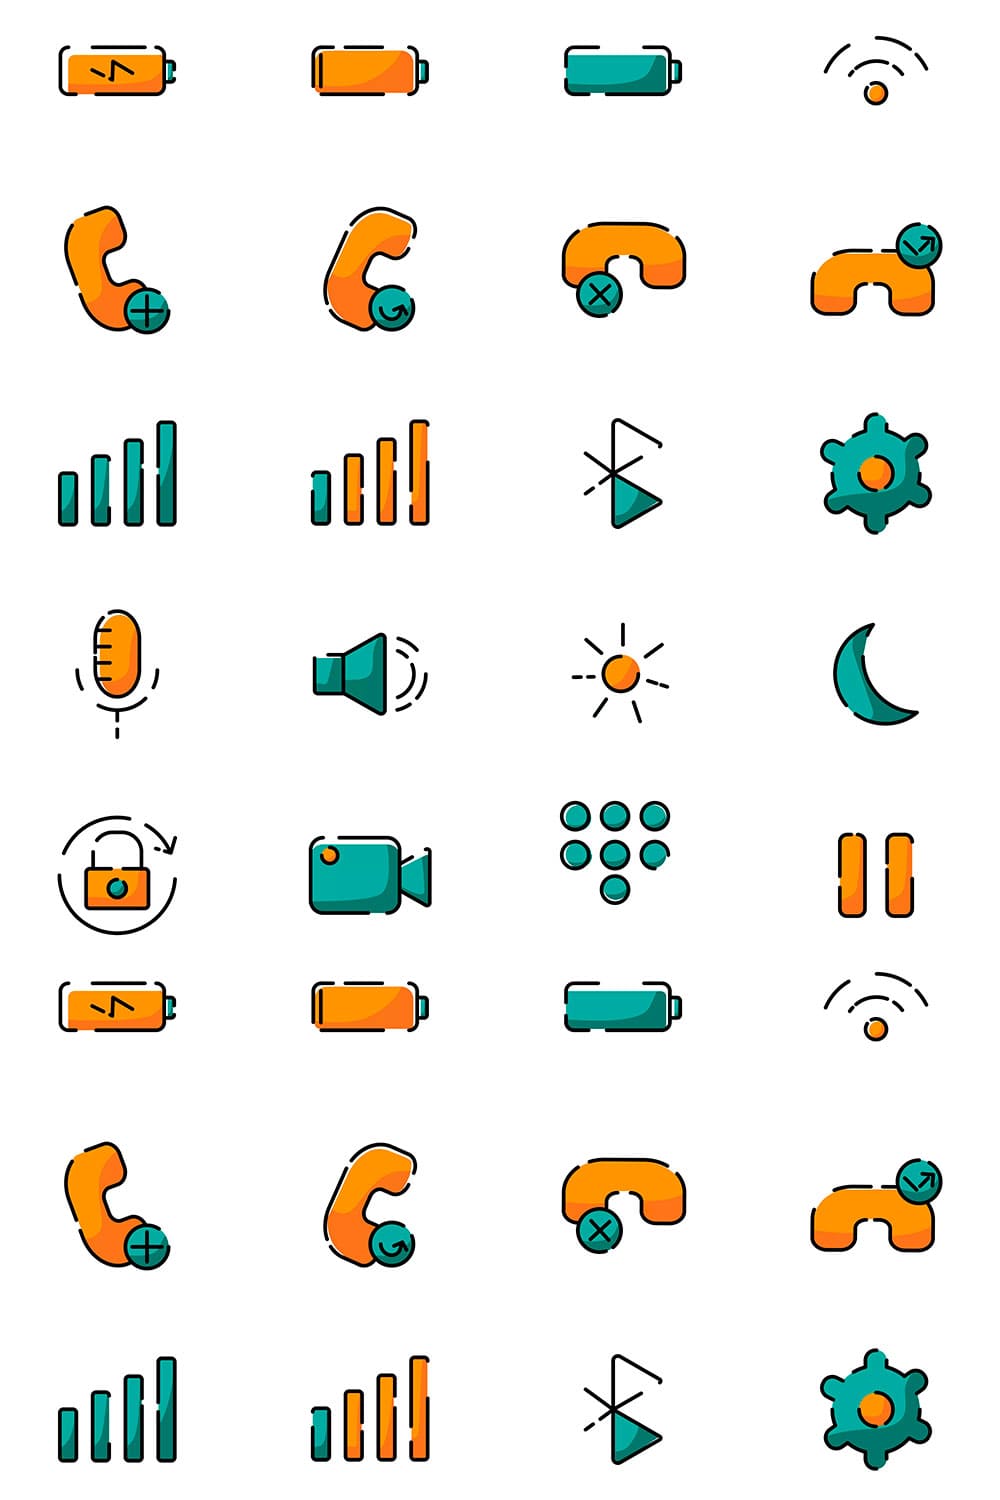 20 minimal mobile icons, picture for pinterest.